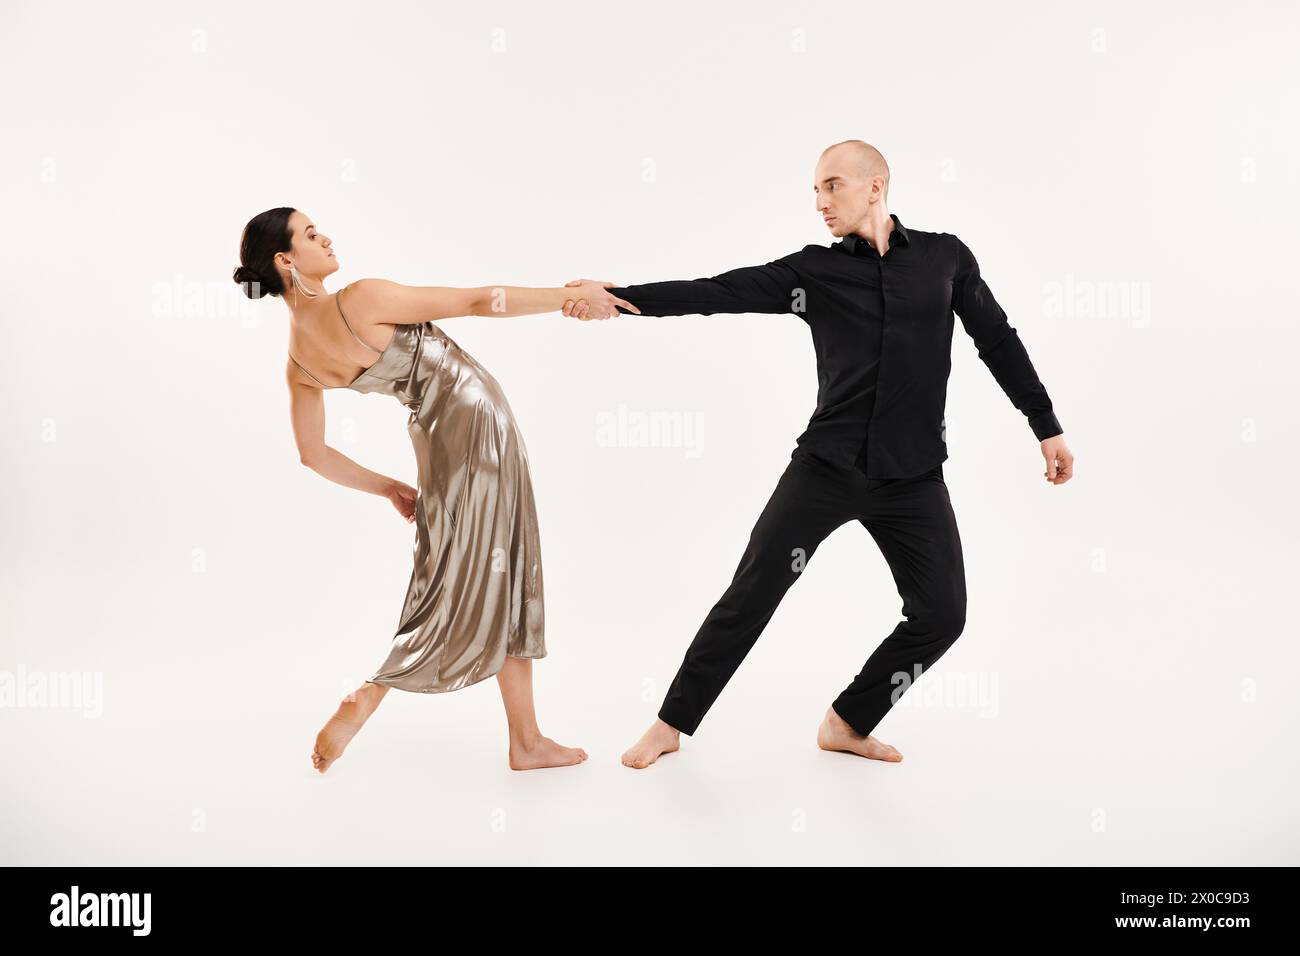 A young man in black and a young woman in a shiny silver dress showcasing acrobatic dance moves in a studio against a white background. Stock Photo